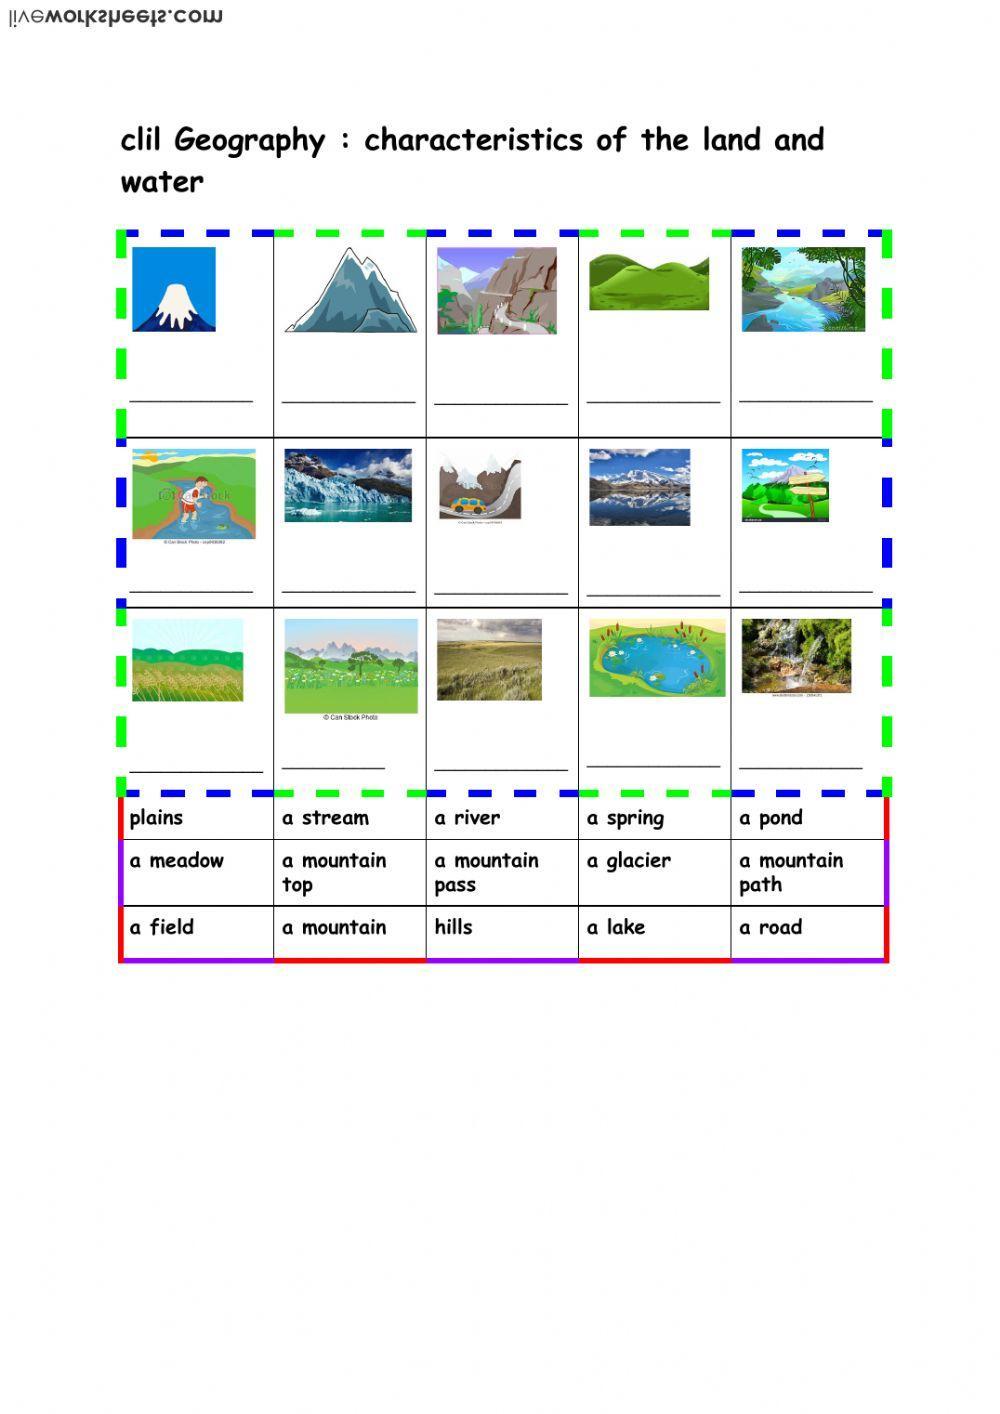 some land and water characteristics